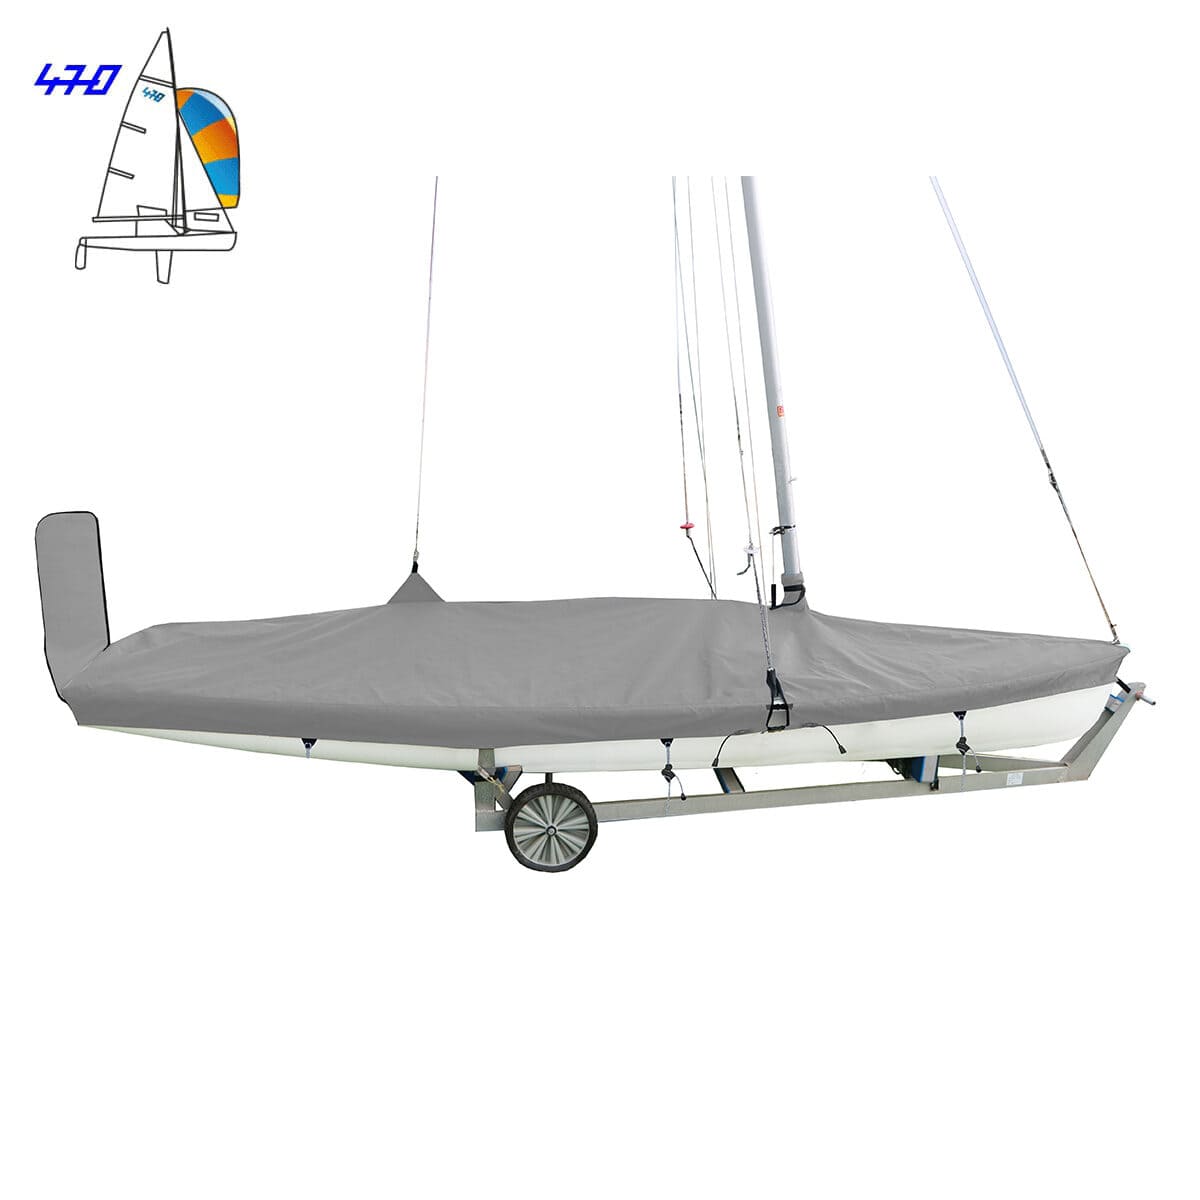 470 Deck Cover With Mast